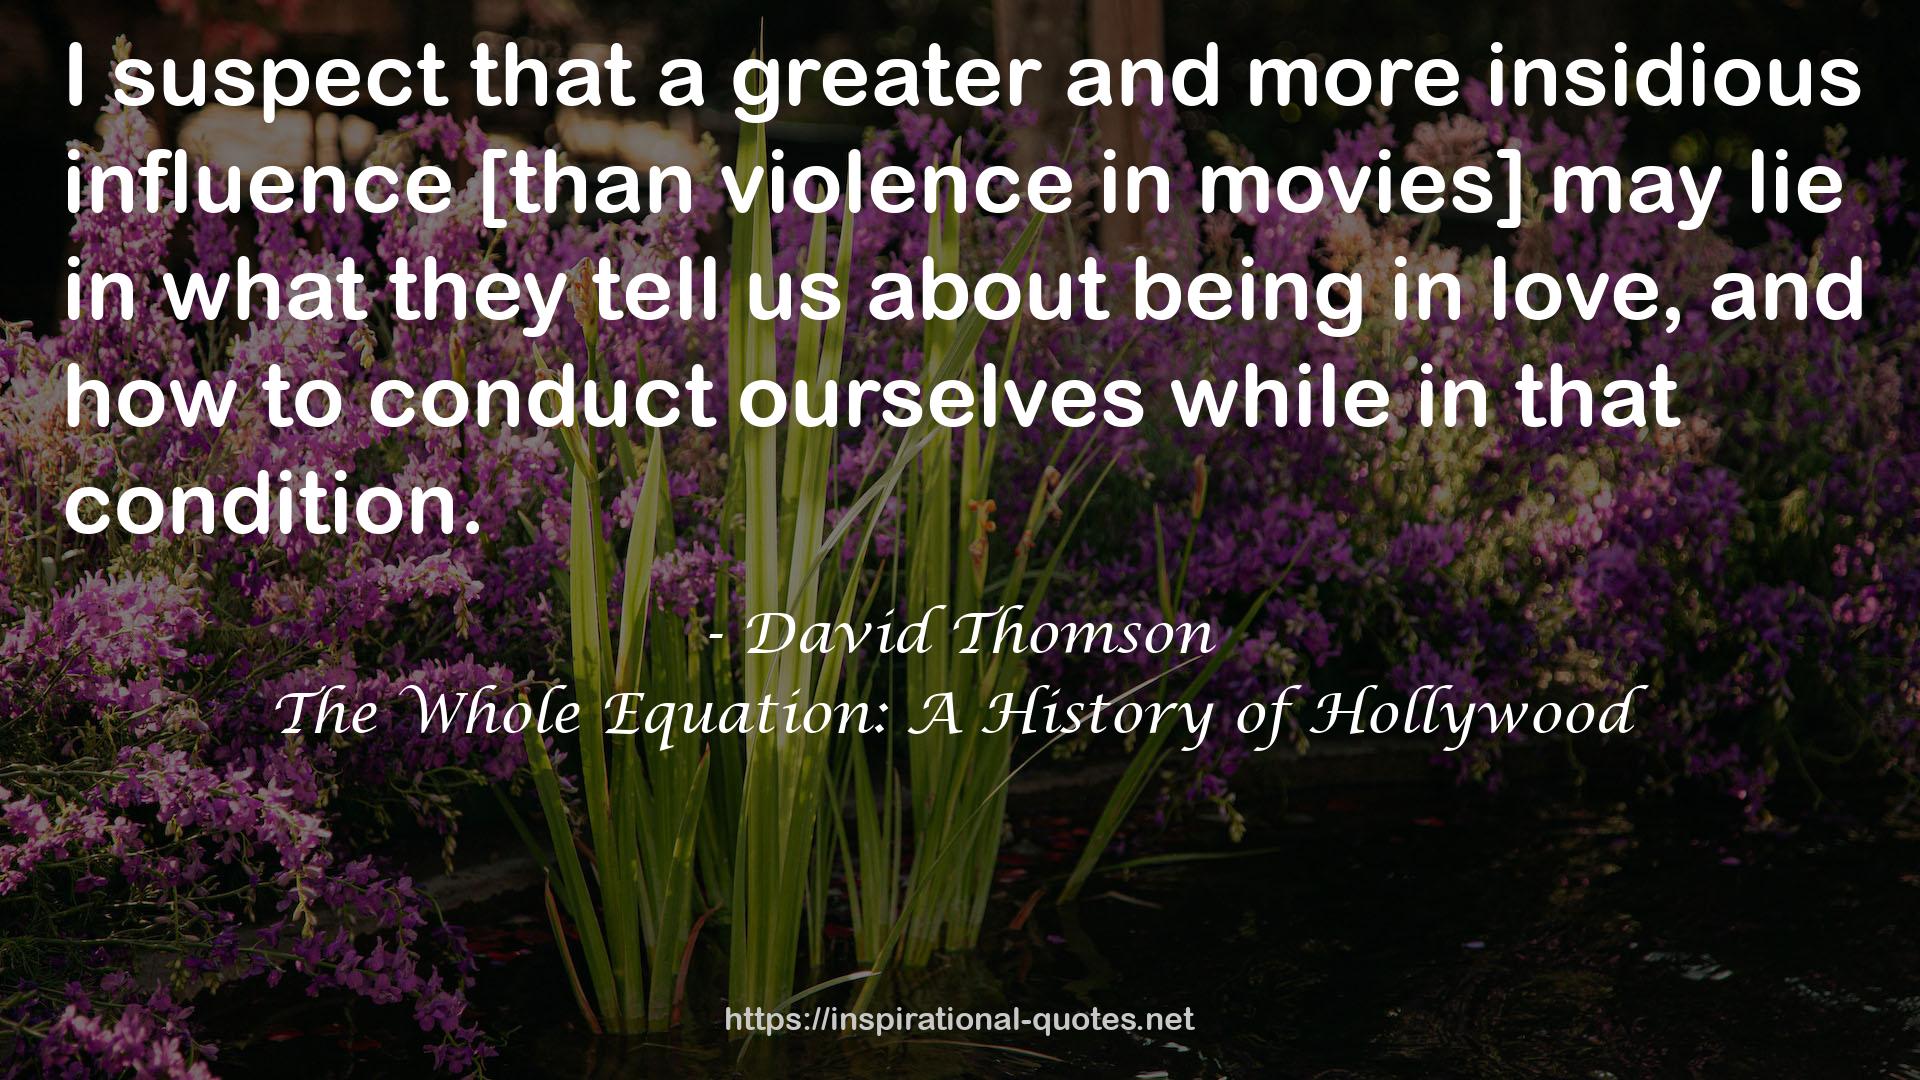 The Whole Equation: A History of Hollywood QUOTES